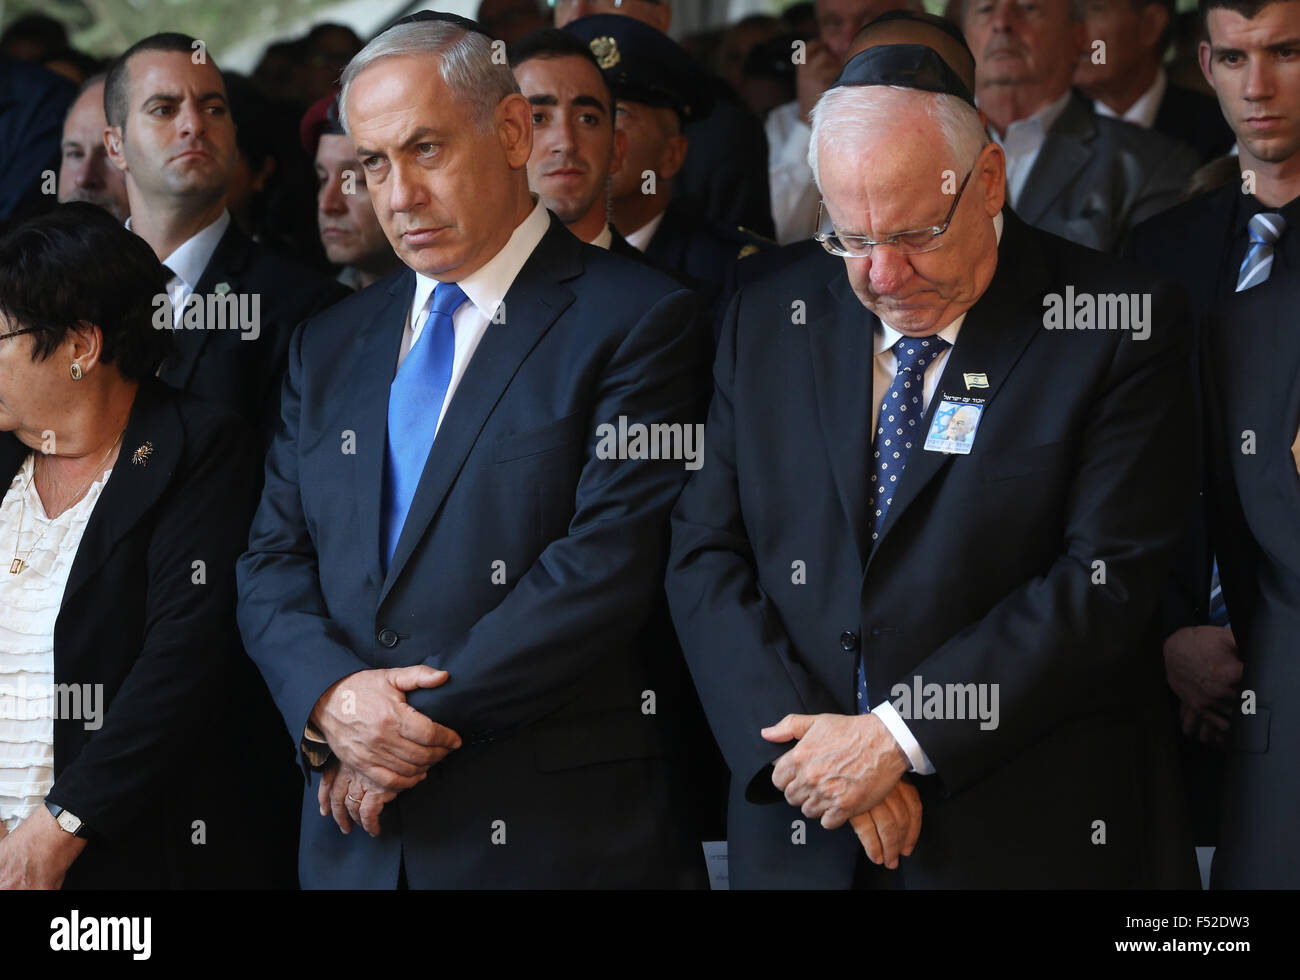 Jerusalem, Israel. 26th October, 2015. Israeli Prime Minister Benjamin Netanyahu (2nd R) and President Reuven Rivlin (1st R) mourn during a state memorial ceremony of the late Israeli Prime Minister Yitzhak Rabin, held on Mount Herzel in Jerusalem, on Oct. 26, 2015. Jerusalem and Tel Aviv on Monday marked the 20th anniversary of the assassination of the late Israeli Prime Minister Yitzhak Rabin. Credit:  Xinhua/Alamy Live News Stock Photo